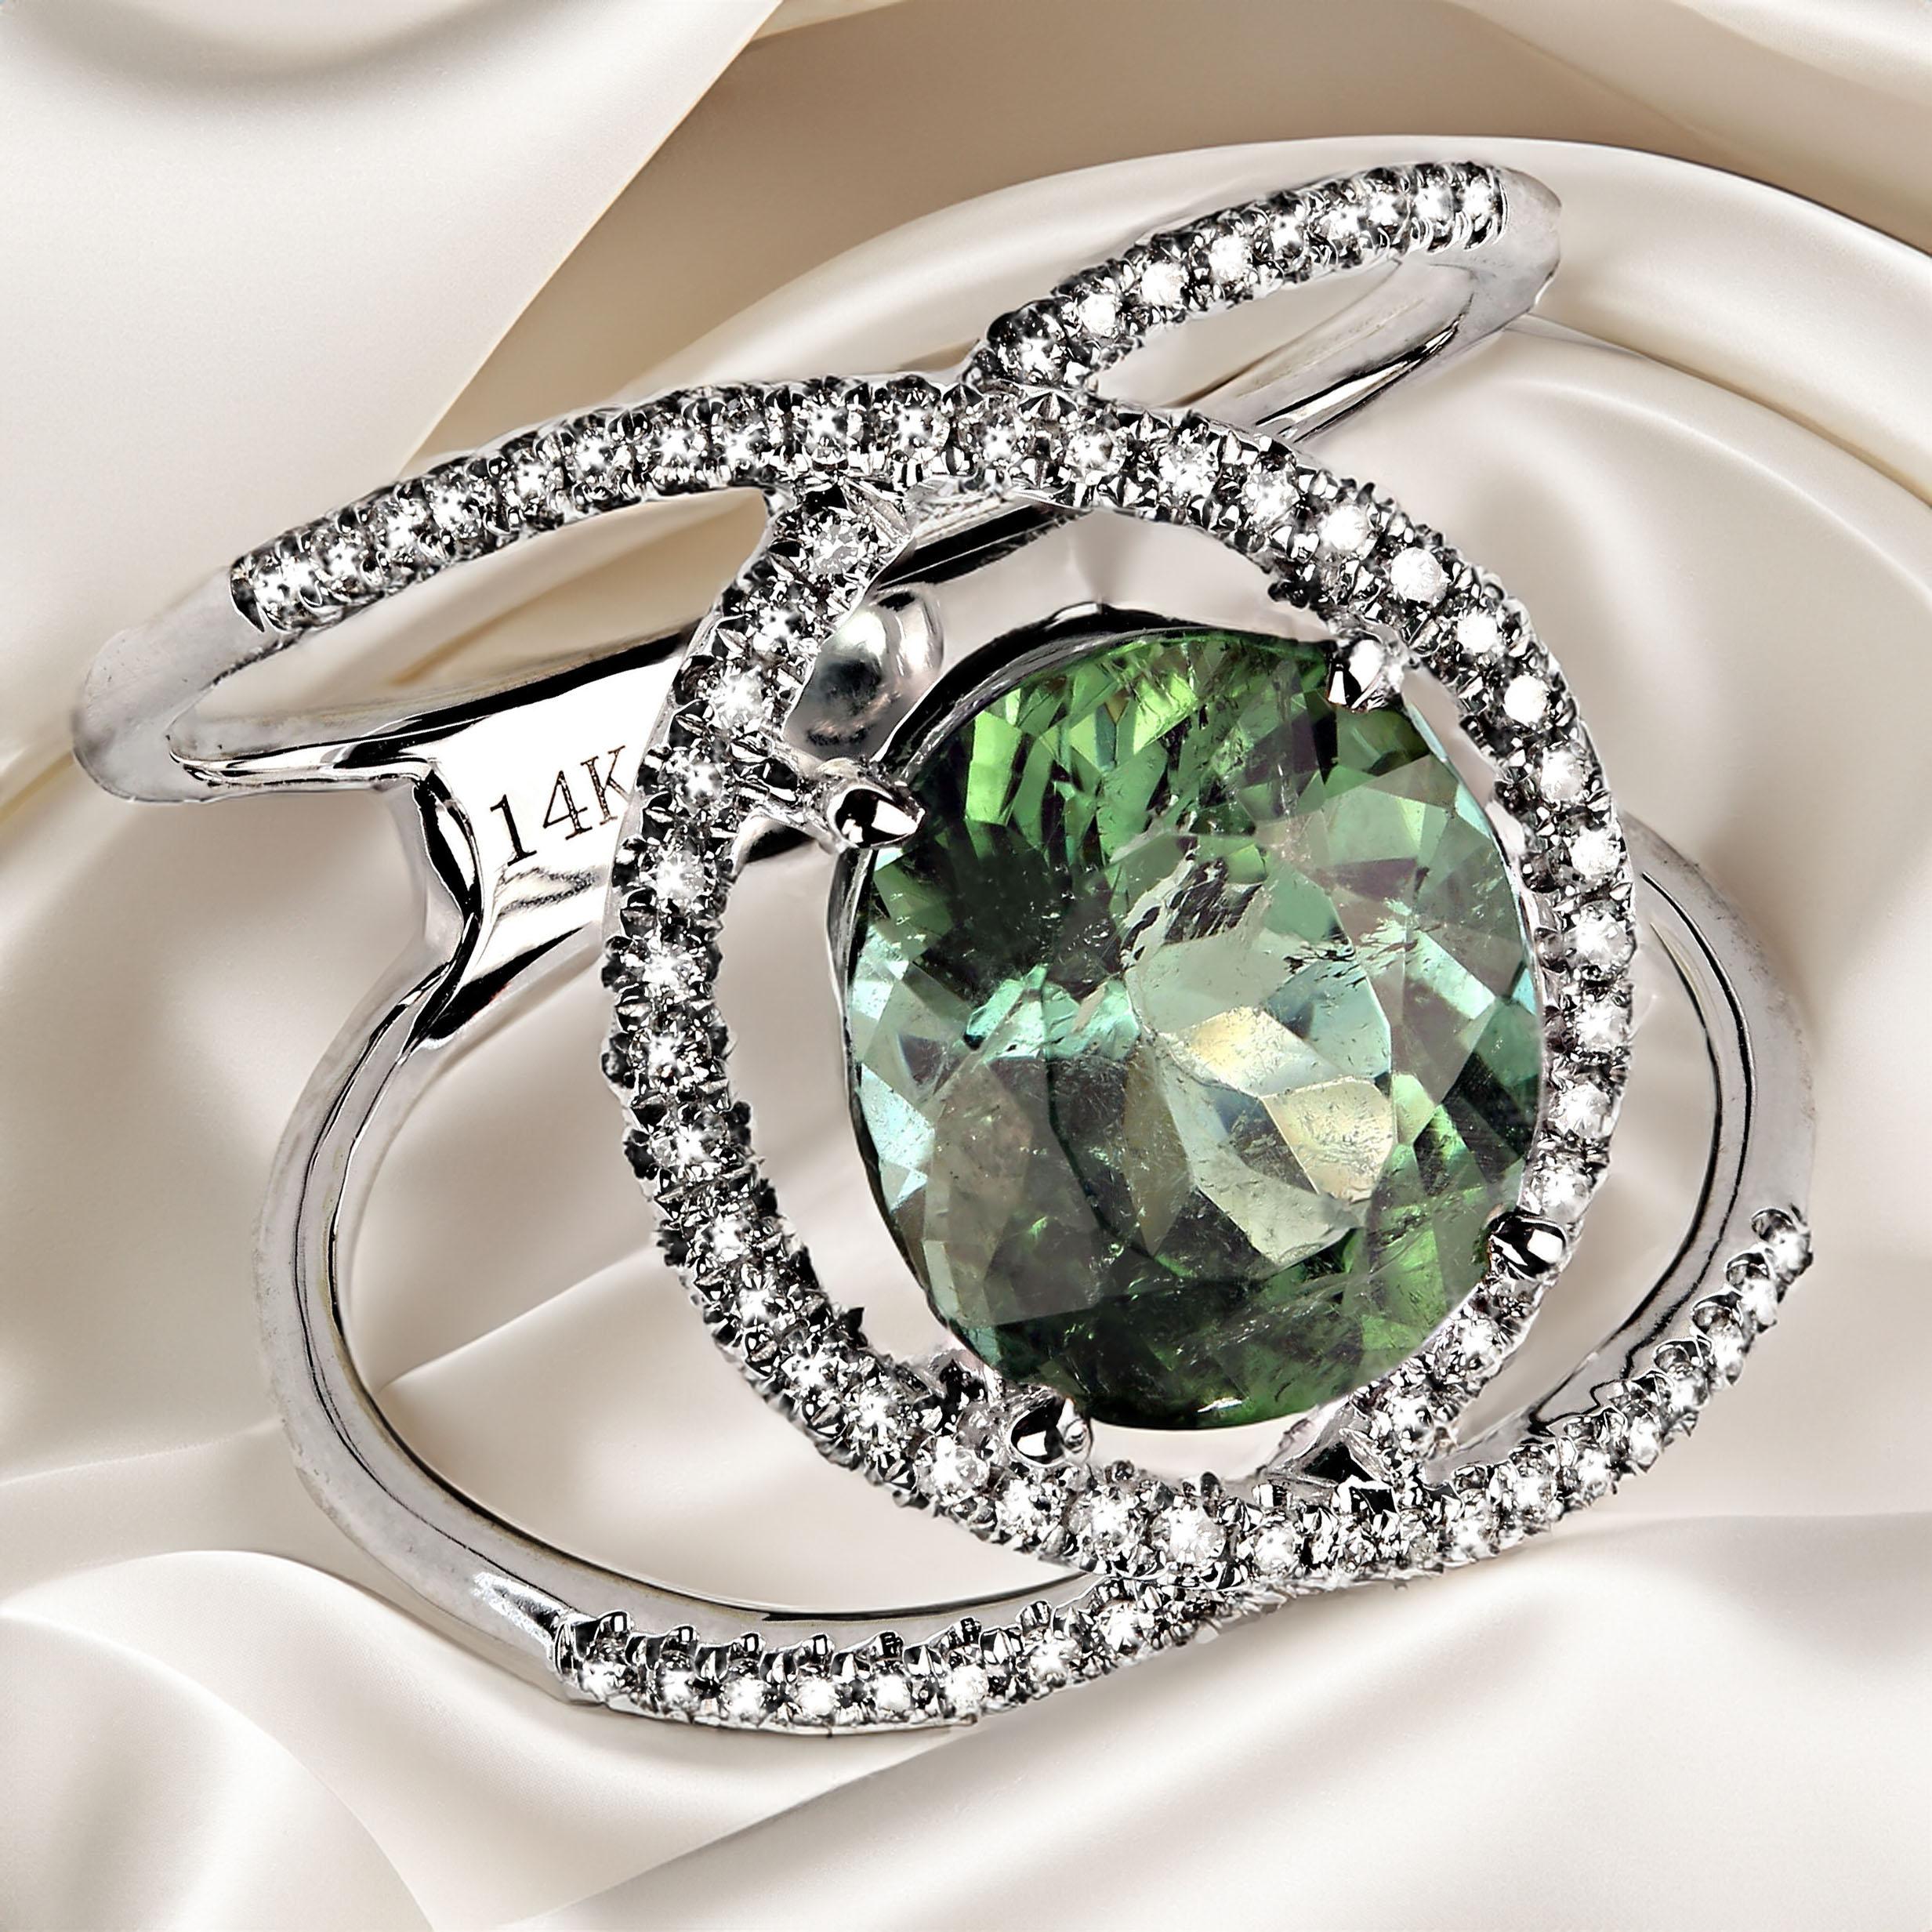 Sparkling oval green tourmaline set in a distinctive modern diamond setting.  This combination enhances both the gorgeous brazilian green tourmaline and the lines of the 14K white gold and diamond setting.  This apple green tourmaline comes from one